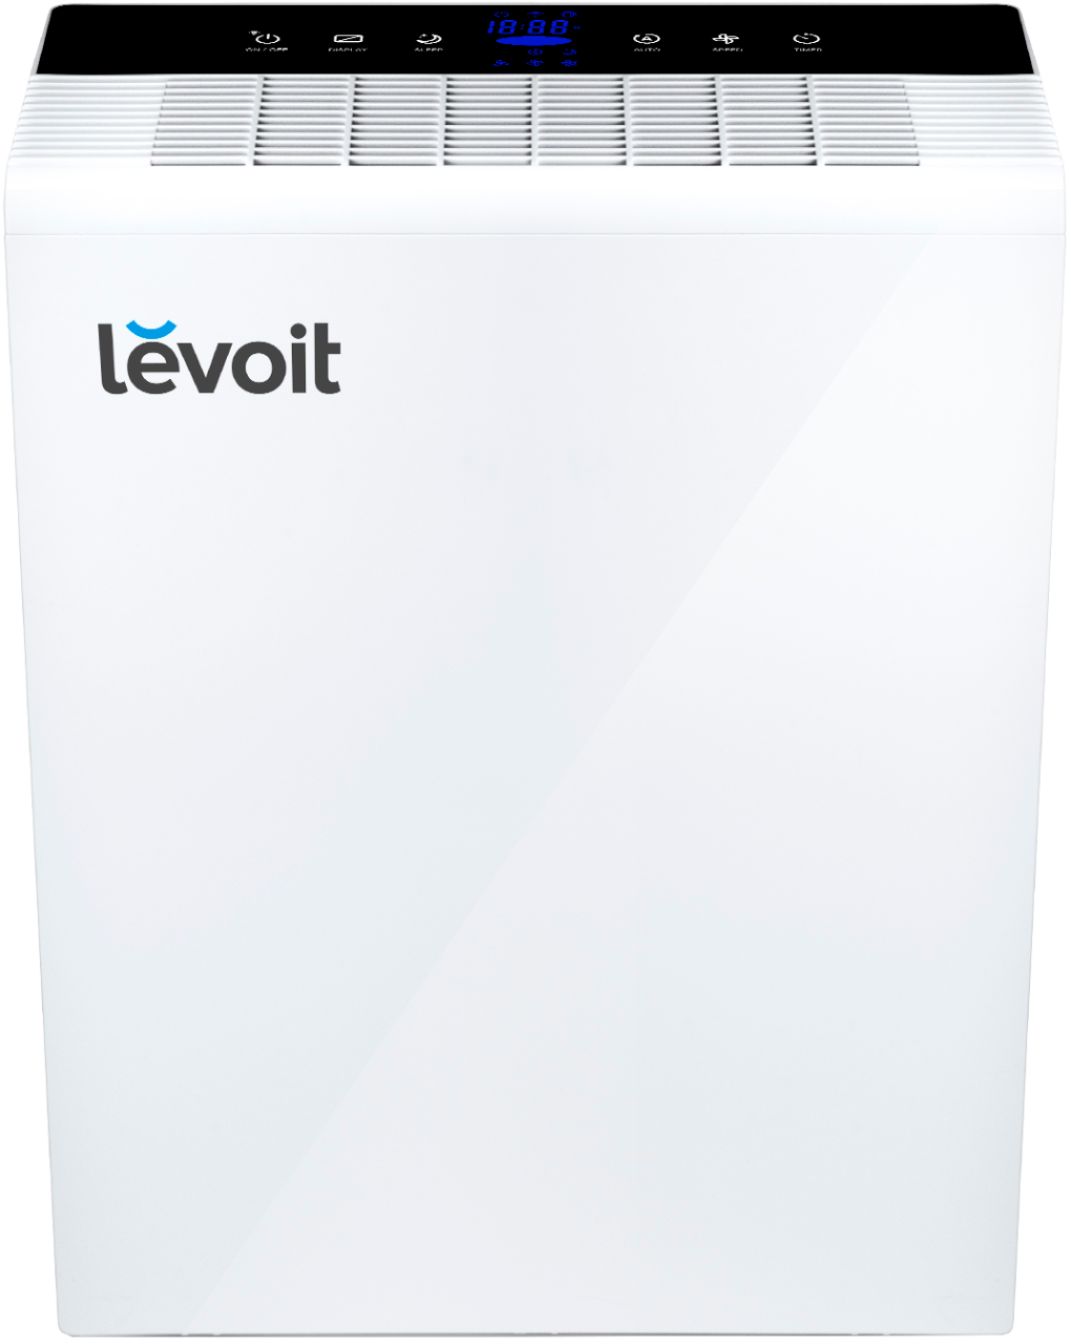 Levoit True HEPA Air Purifier LV-PUR131, Compact Air Cleaner for